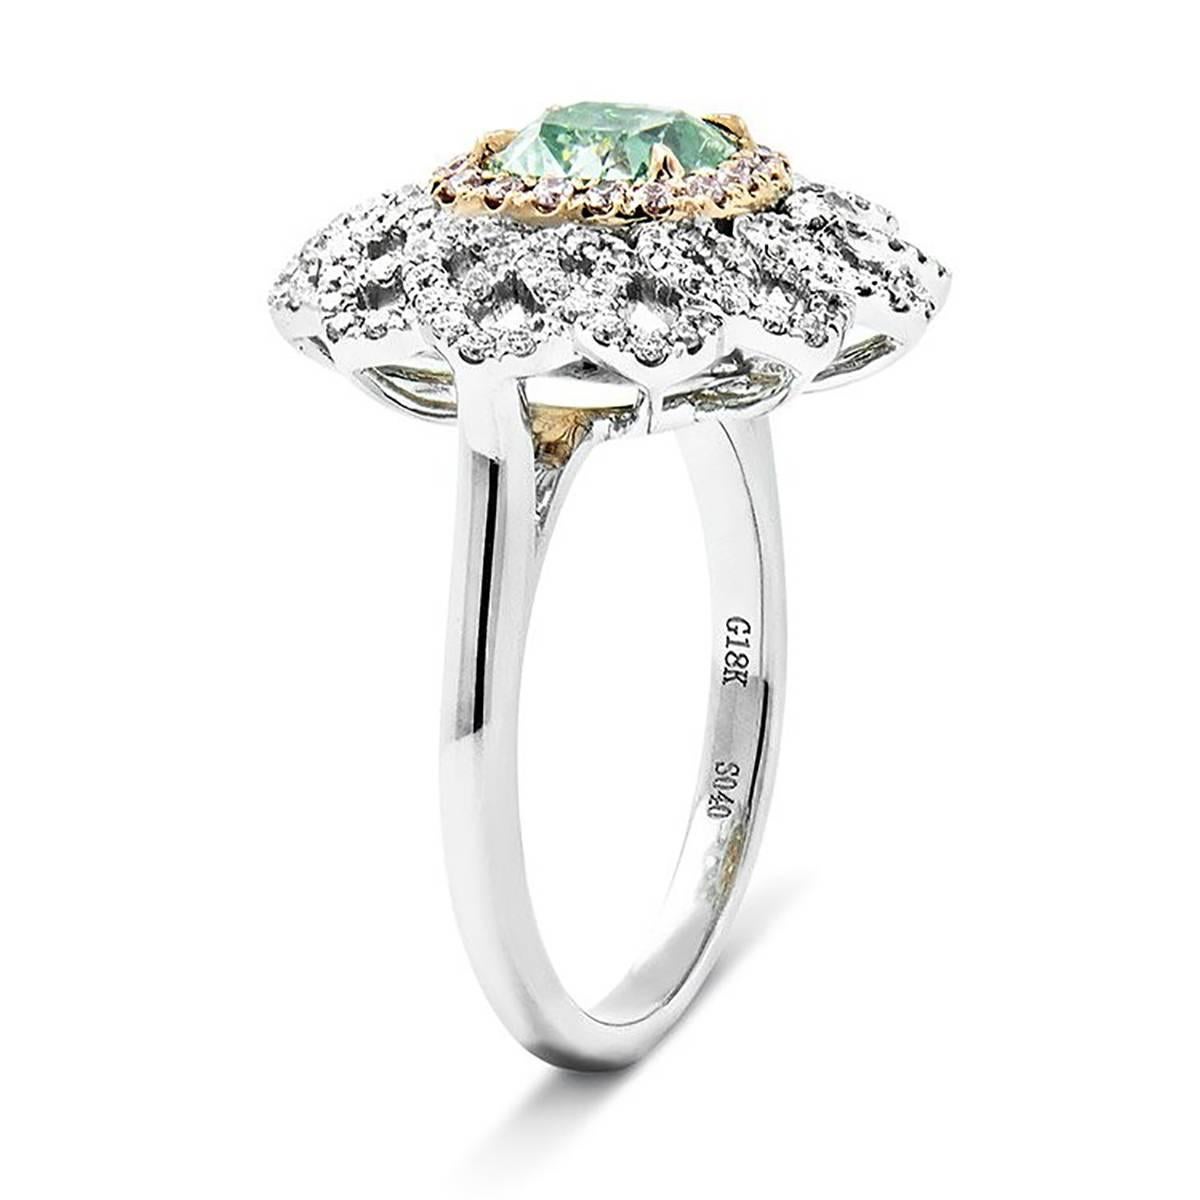 18k Ring with one GIA certified 1.39 carat Fancy Light Yellowish Green VS2 Cushion and 18 round pink diaamonds weighing 0.18 carats and 120 round white diamonds weighing 0.48 carats. 6.95g